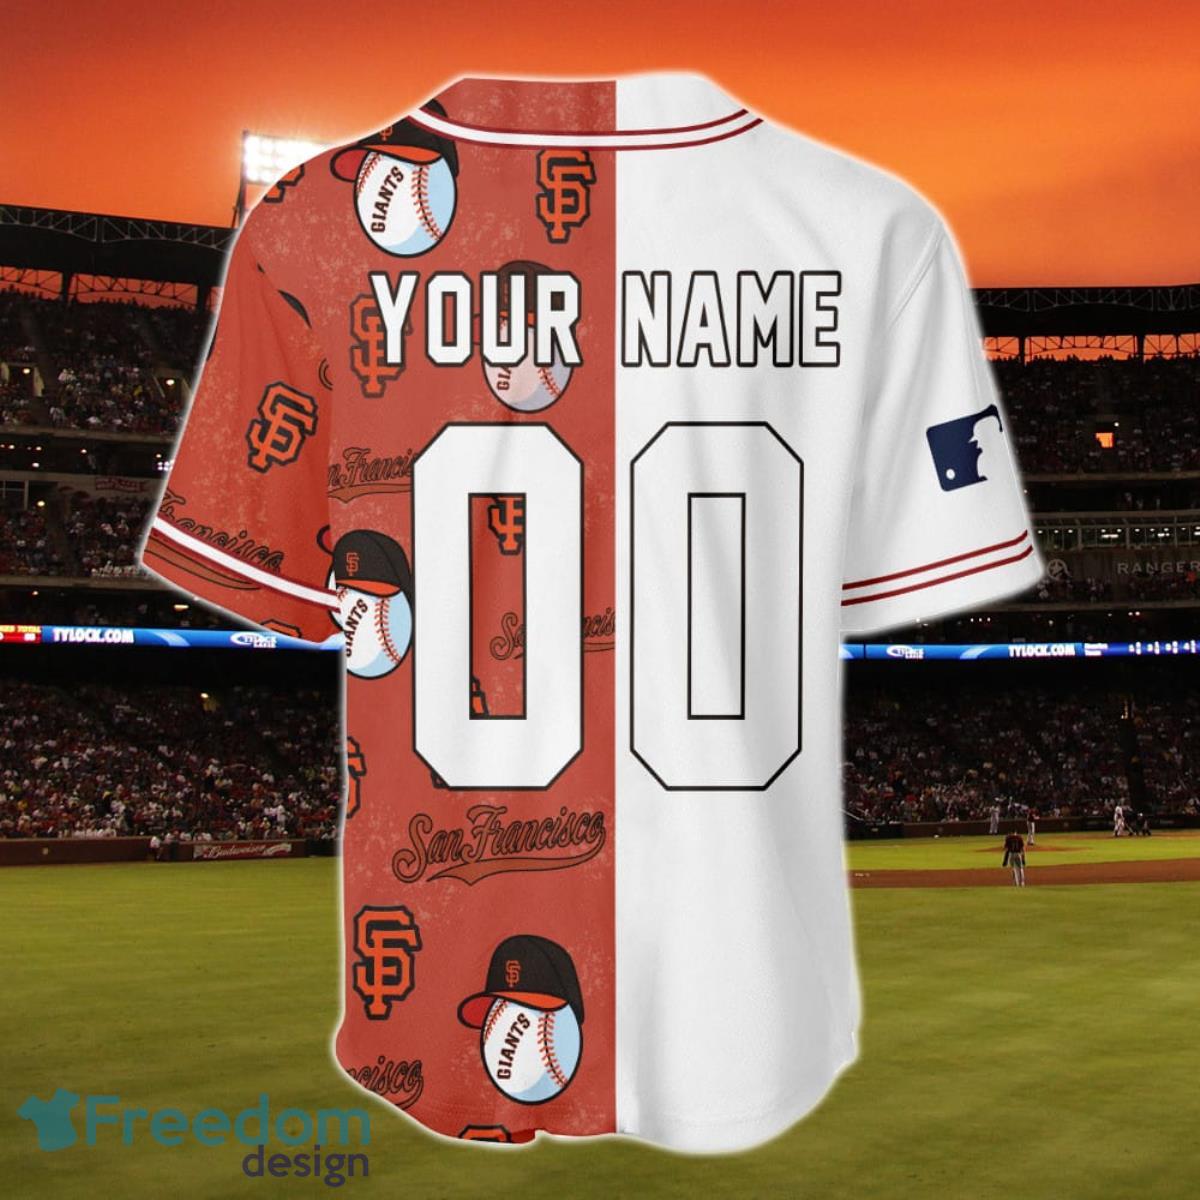 san francisco giants personalized jersey